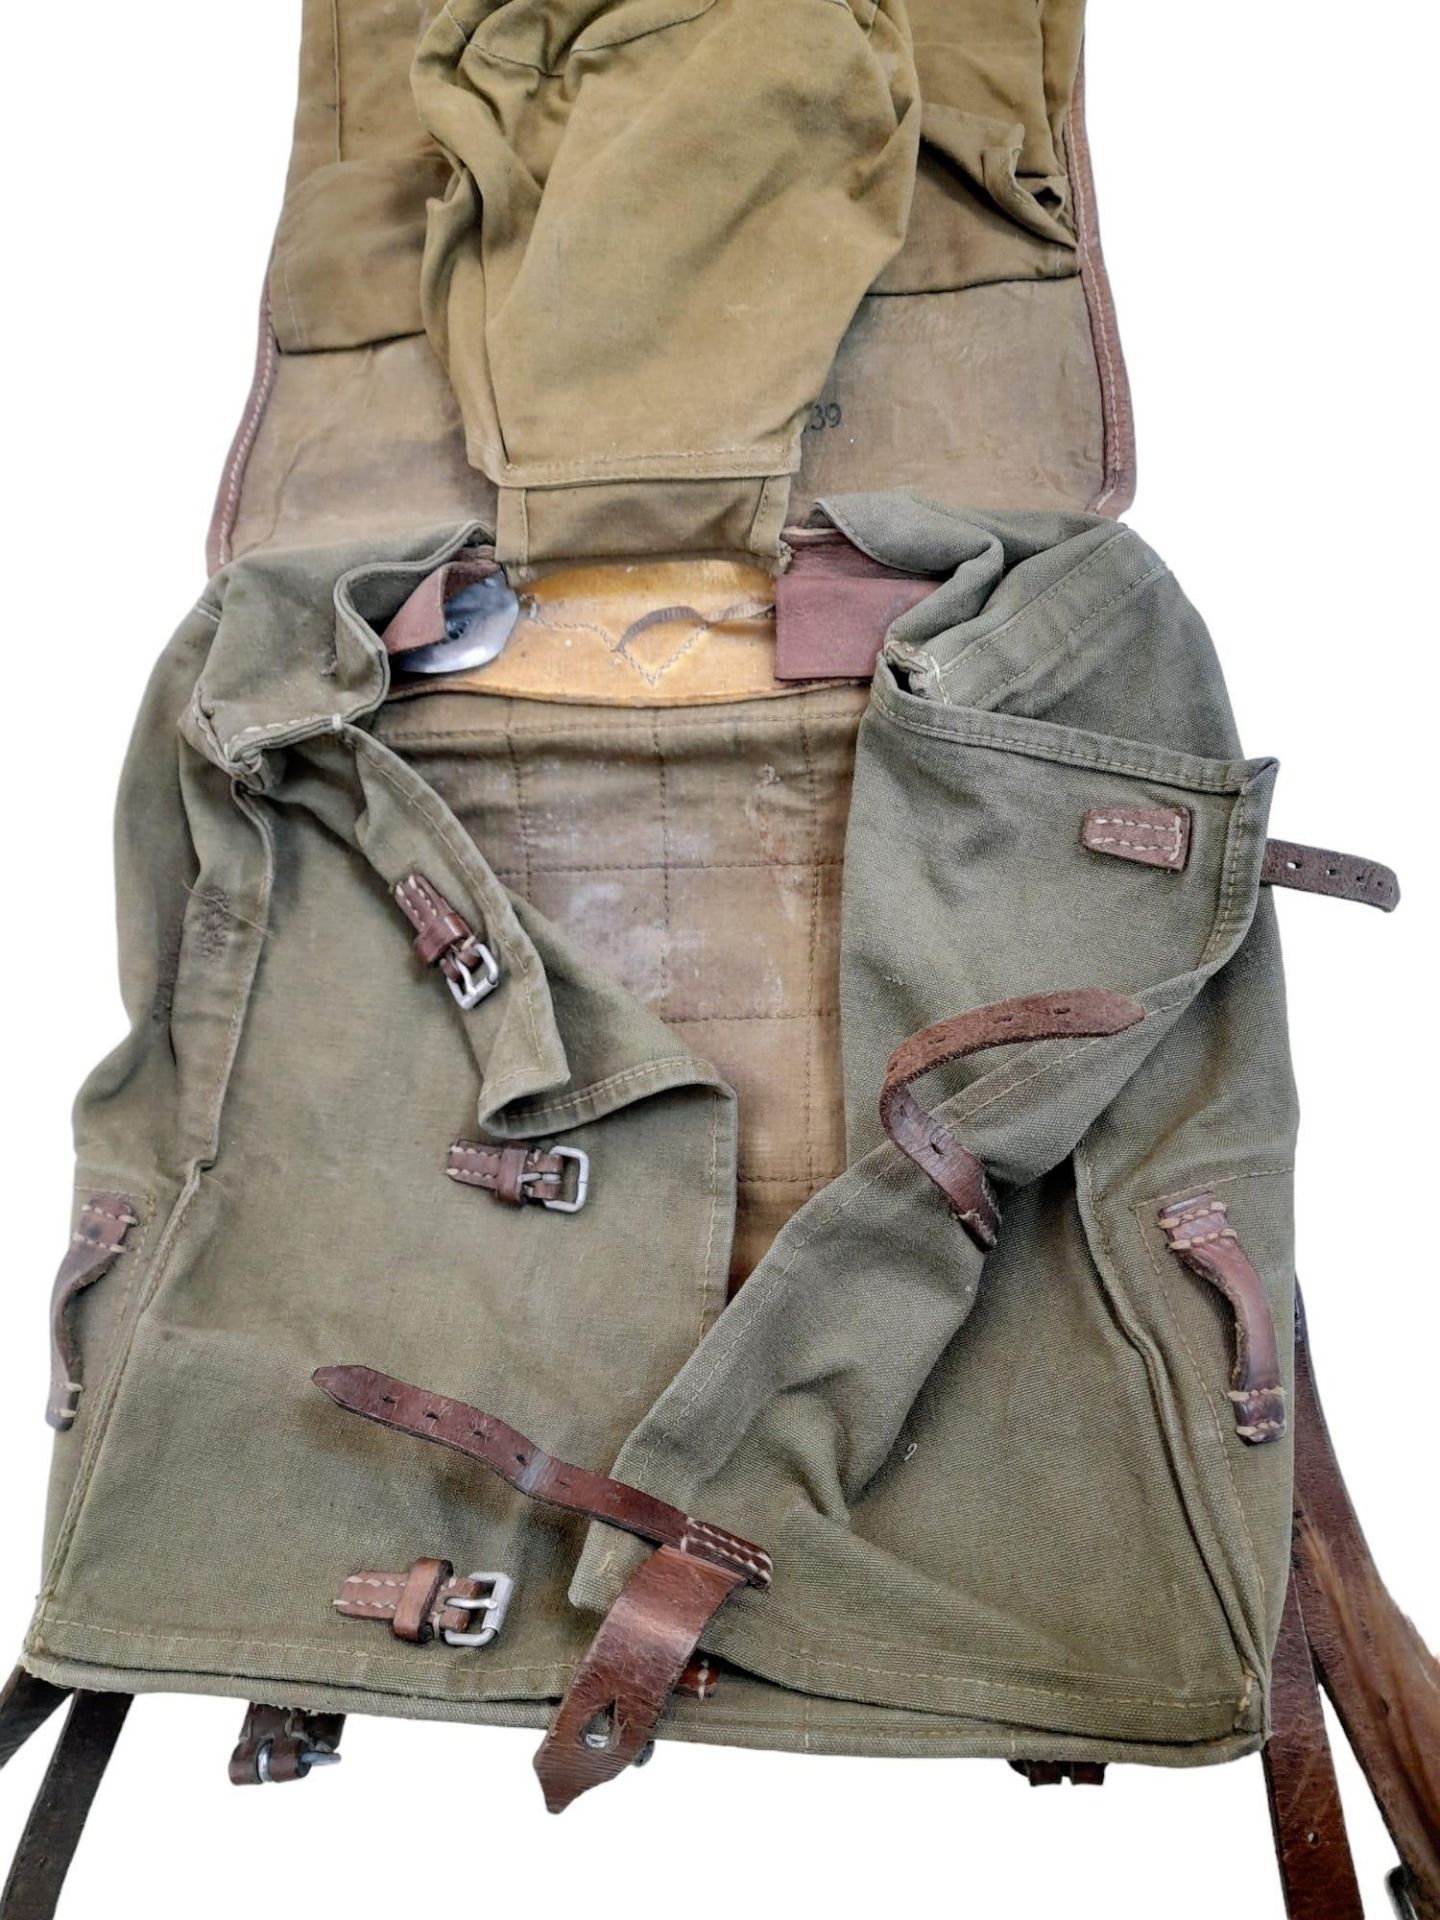 WW2 German Tournister “Pony Pack” Dated 1939. Used by the Hitler Youth and ground troops. - Image 4 of 7